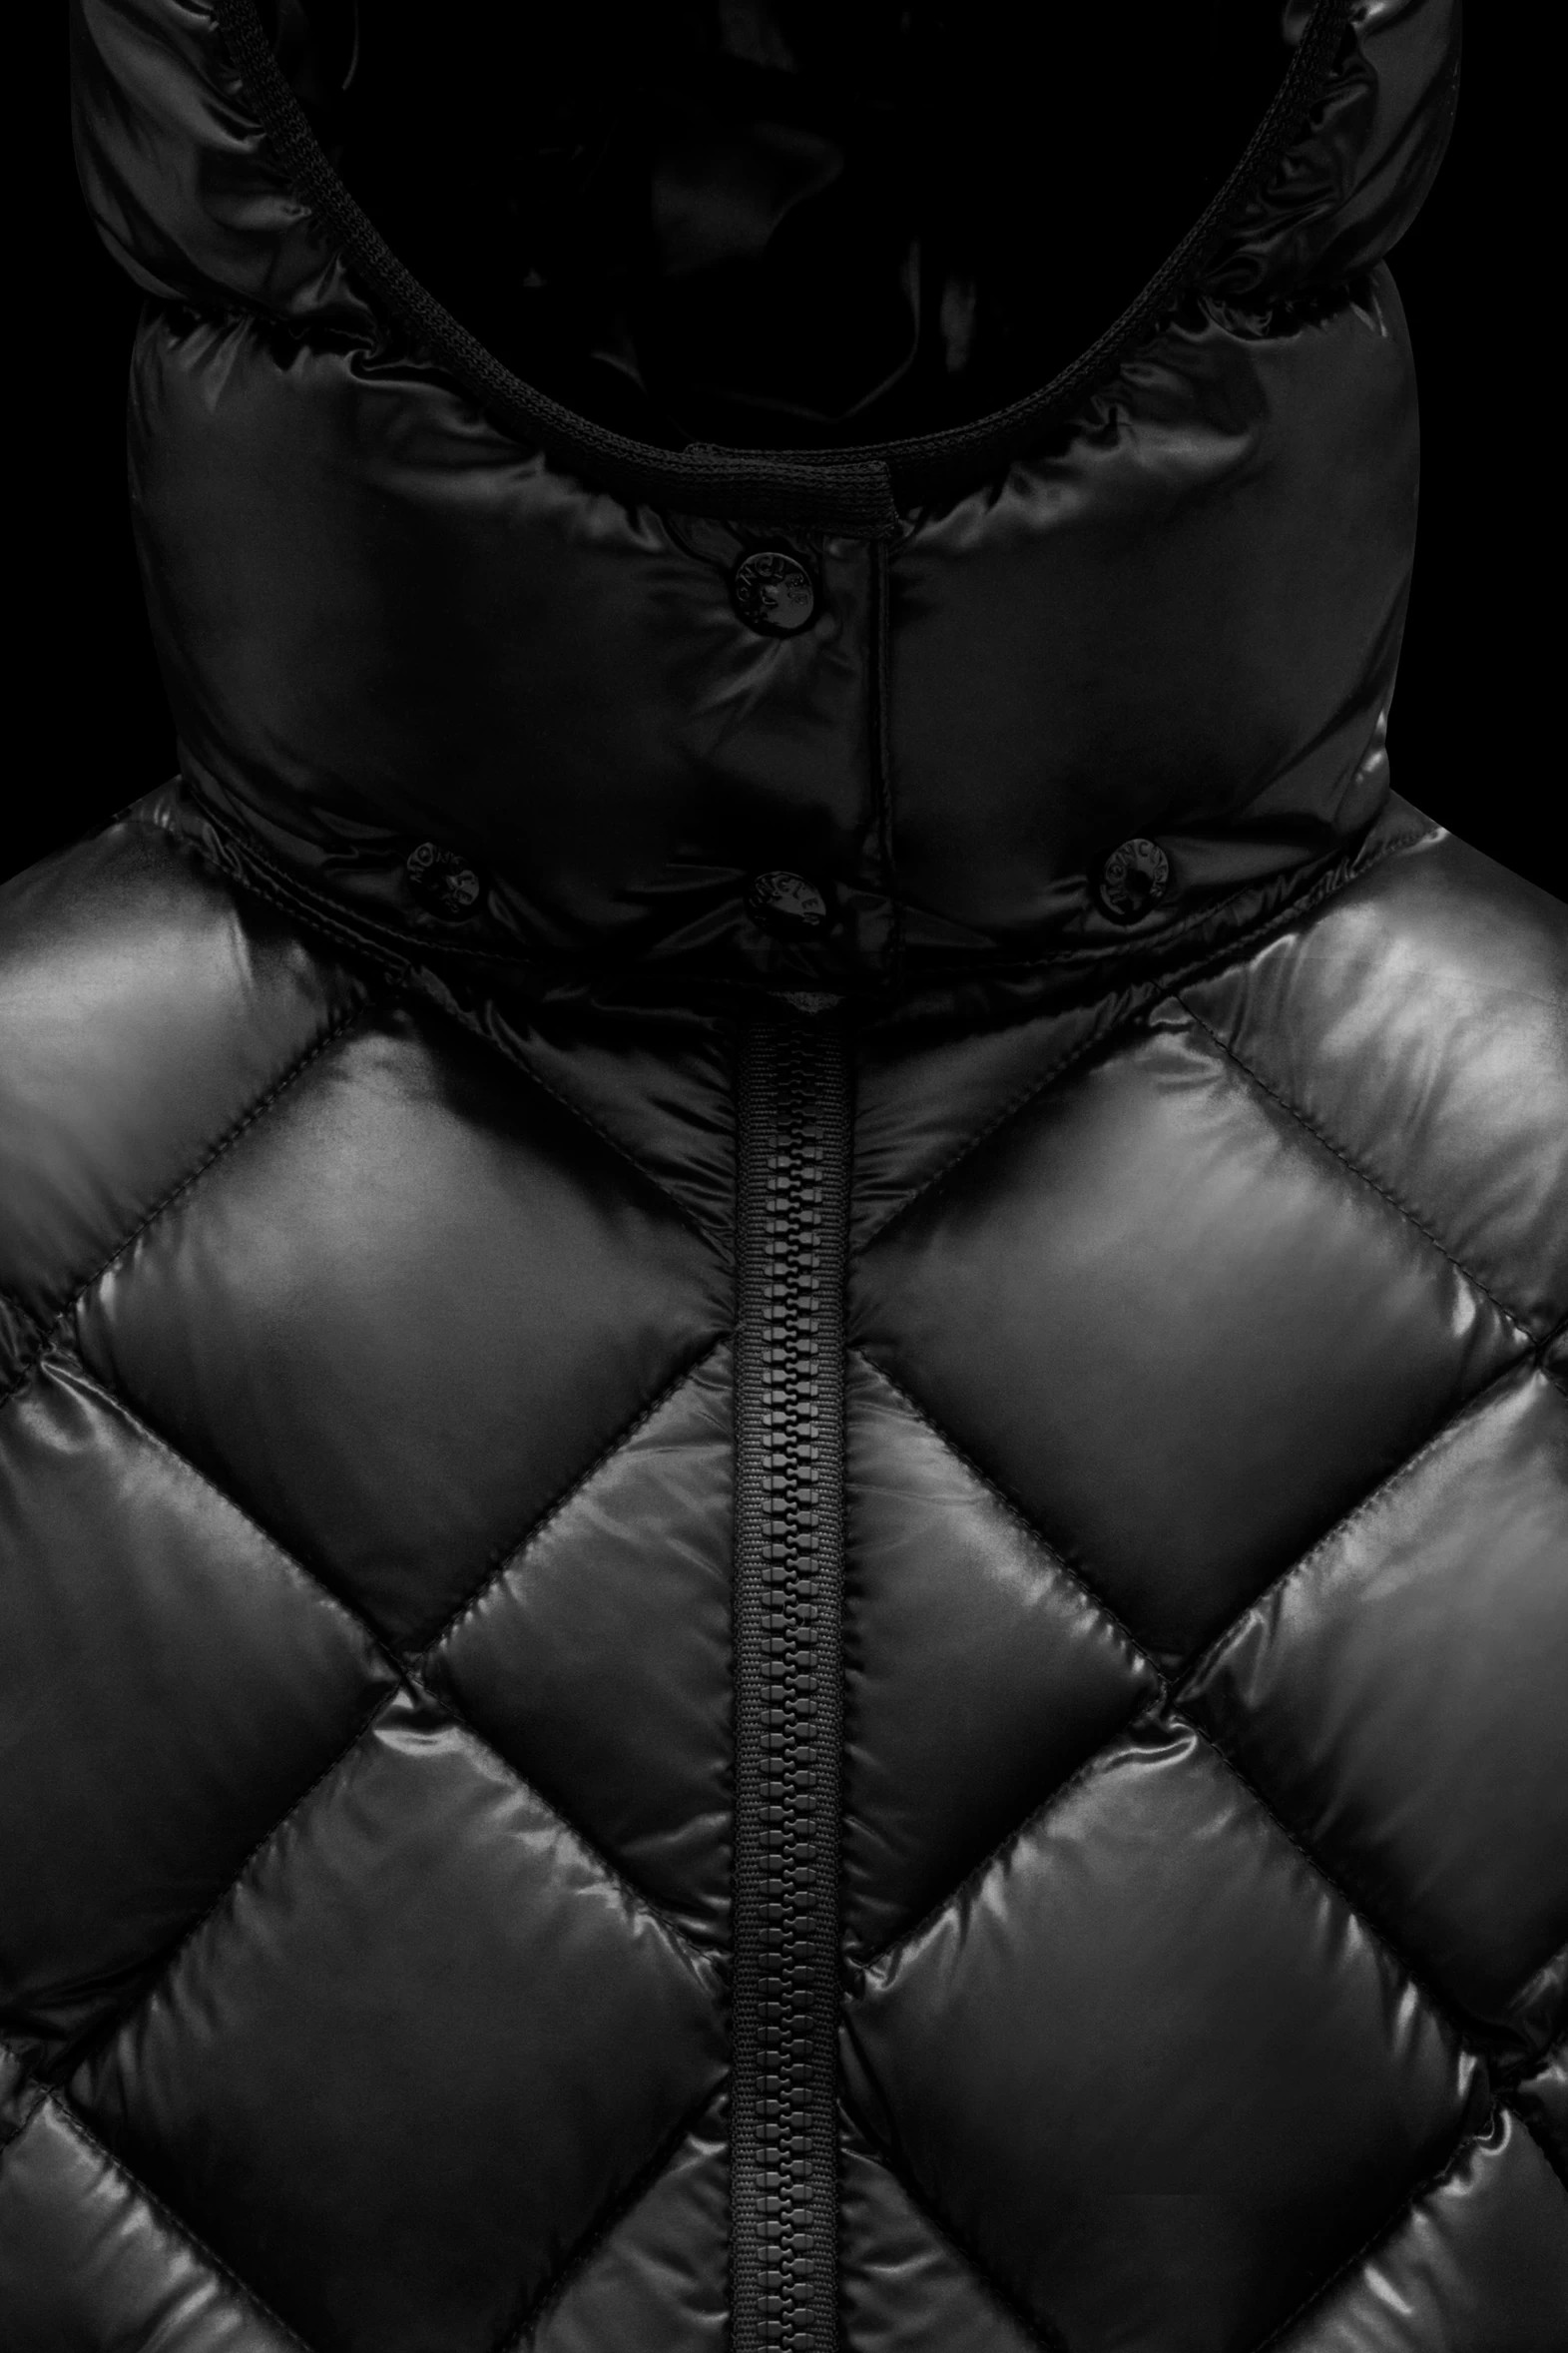 Louis Vuitton MONOGRAM Louis Vuitton MONOGRAM BOYHOOD PUFFER LEATHER GILET